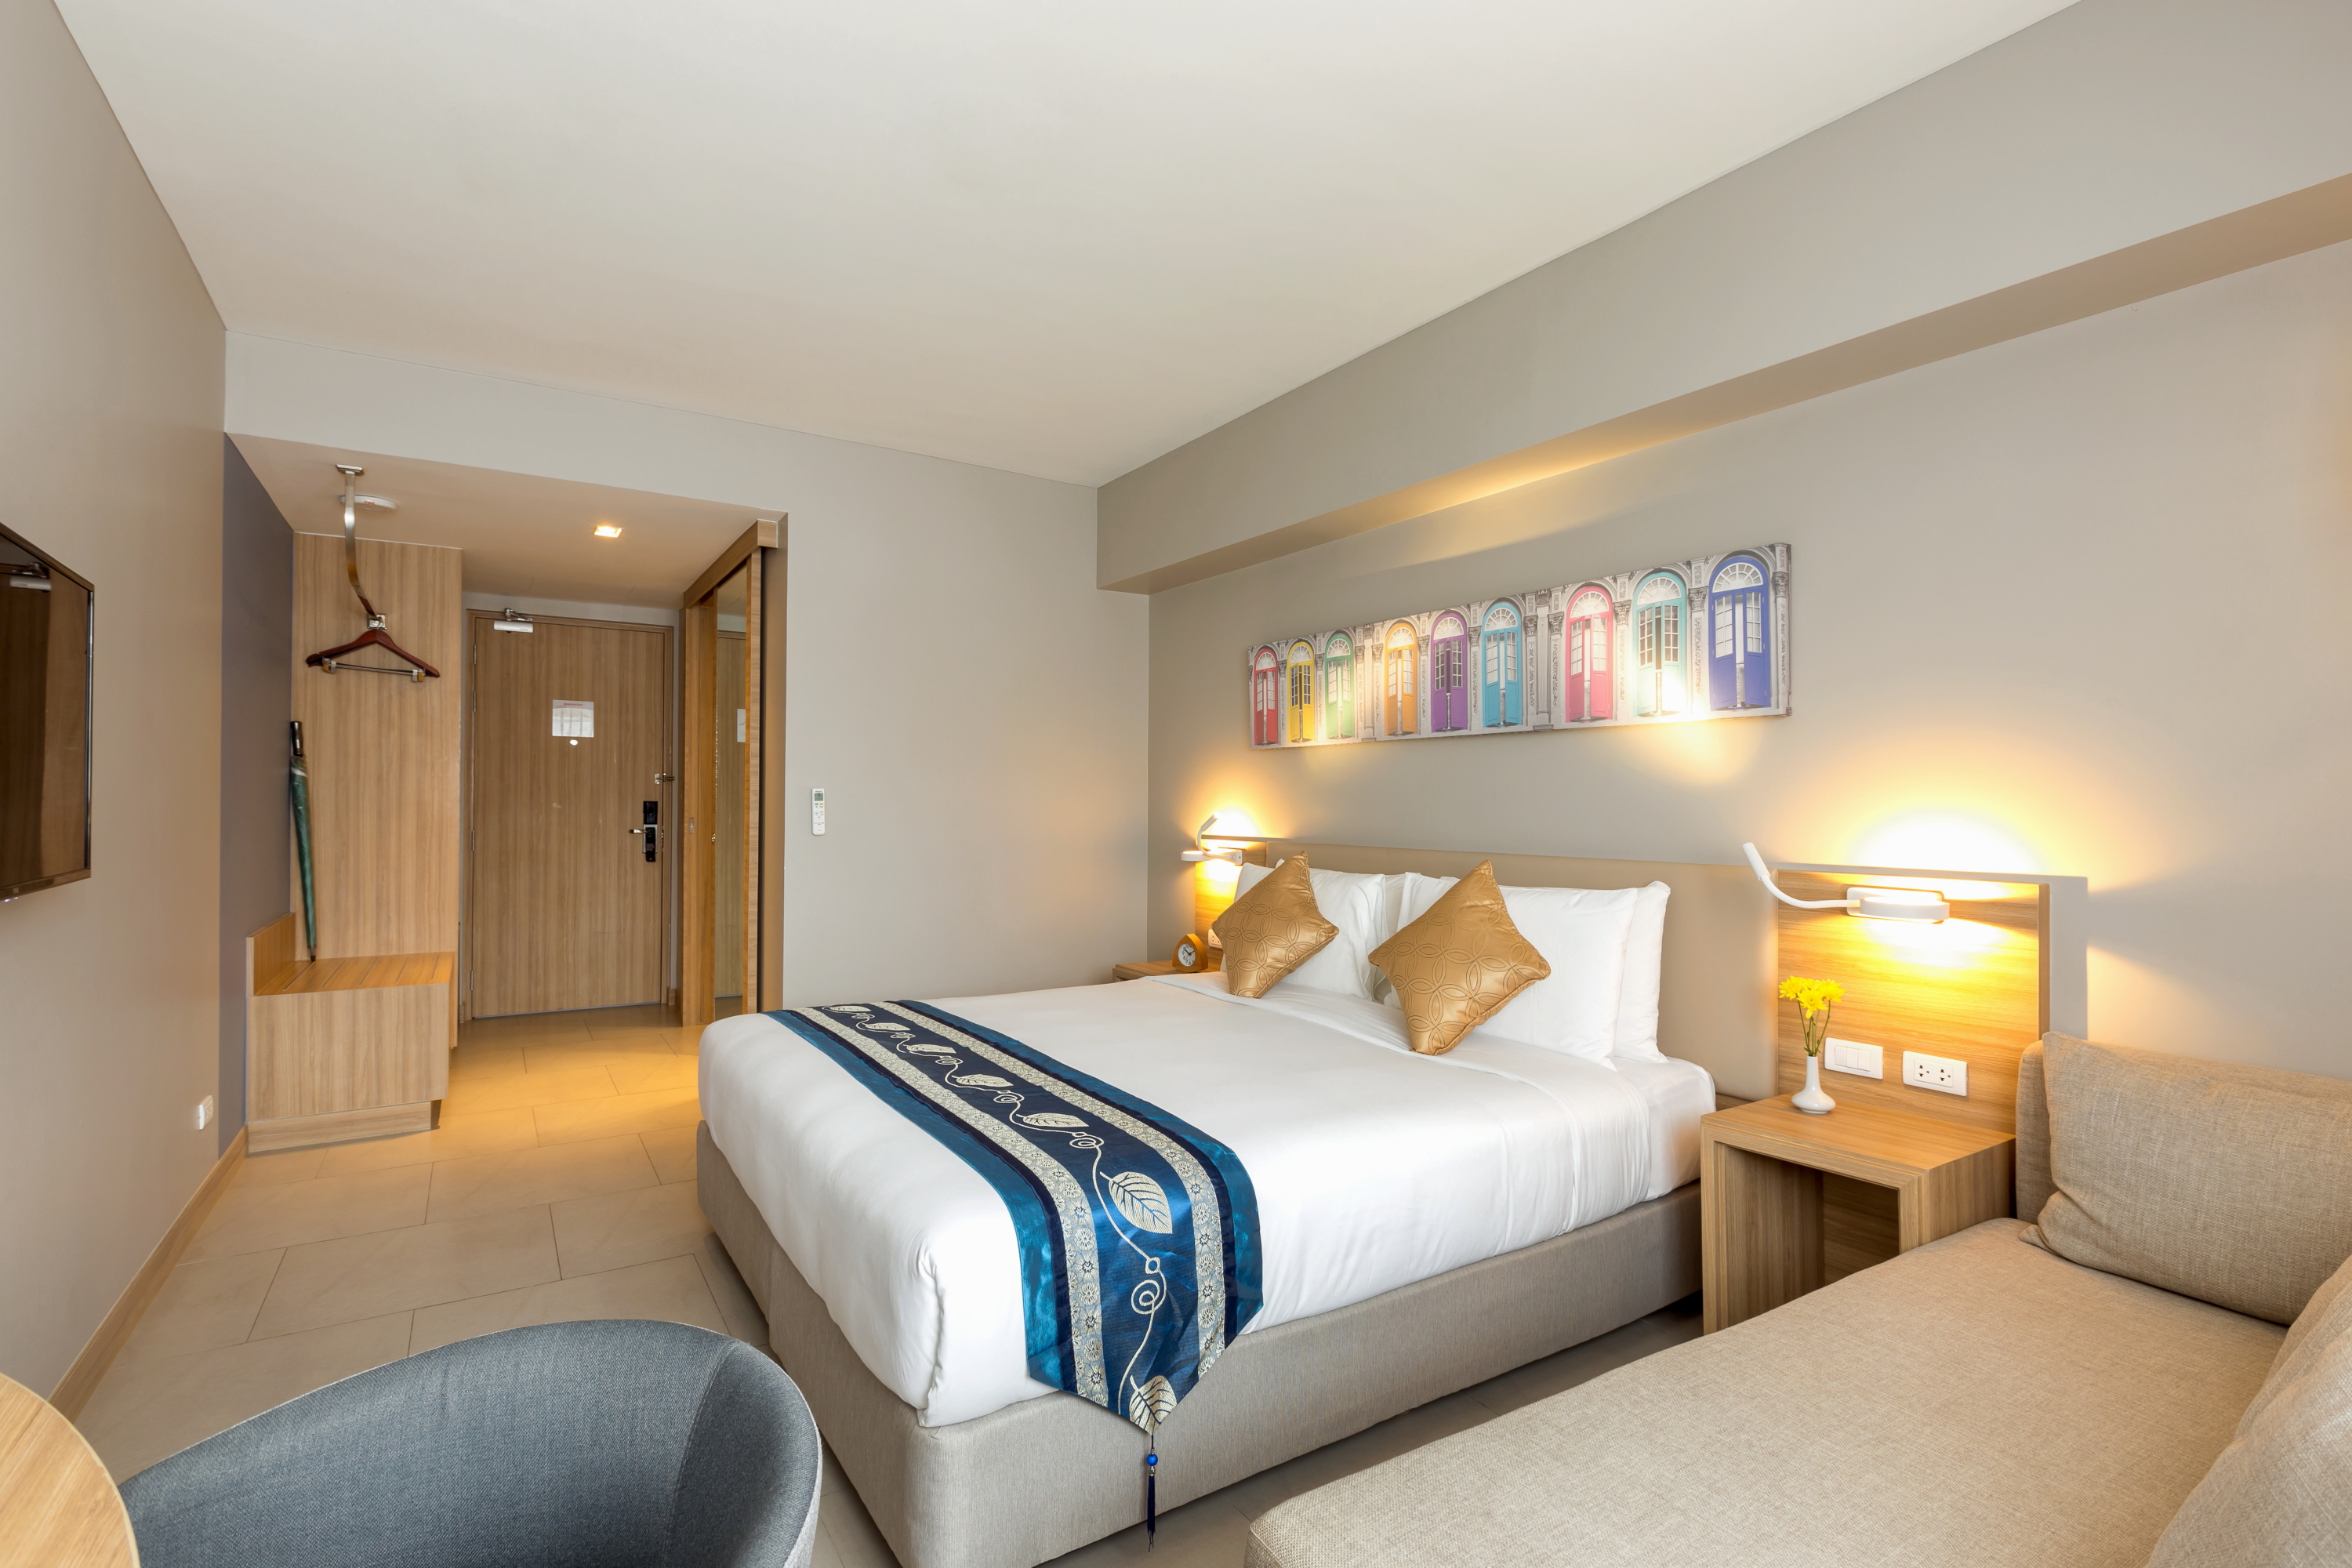 Deluxe Room at Oakwood Journeyhub Phuket. Click to enlarge.